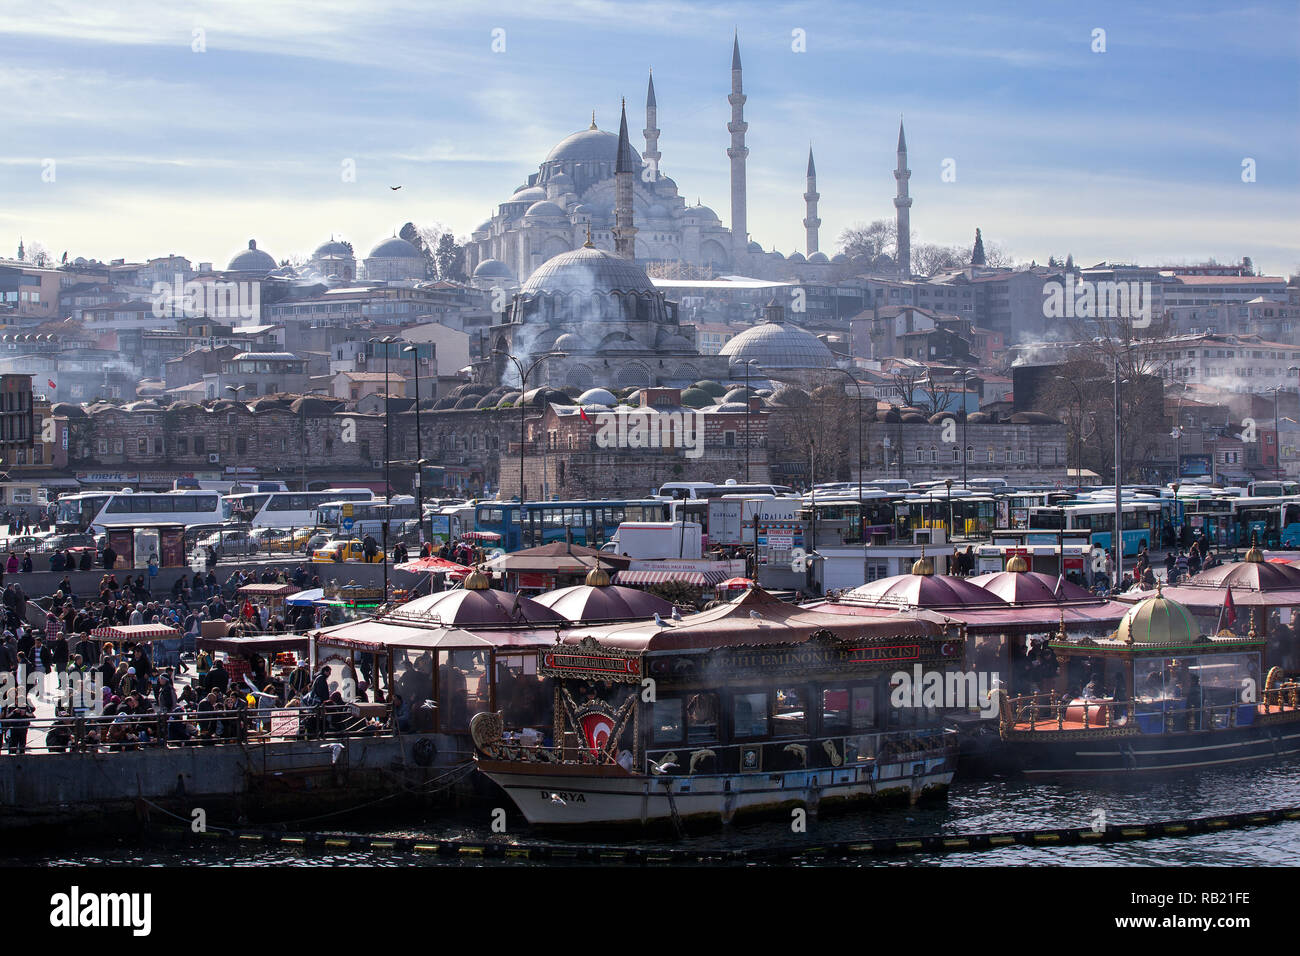 view of daily life in İstanbul. Suleymaniye mosque from Ataturk bridge over Golden Horn. Stock Photo